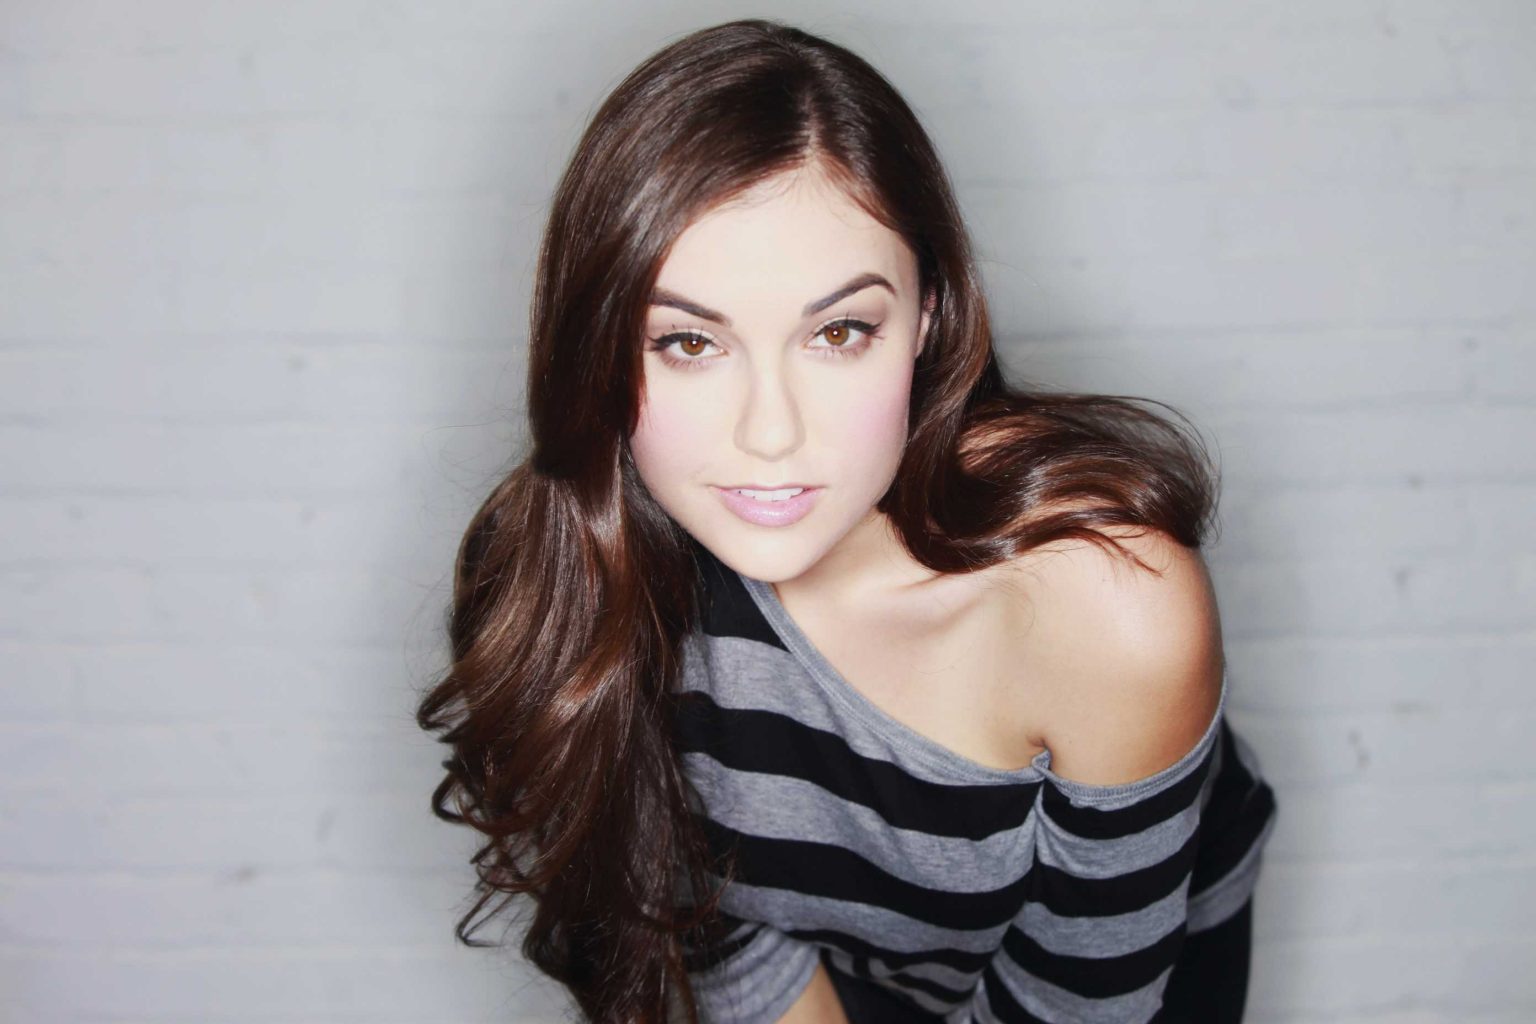 44 Sasha Grey Nude Pictures Can Be Pleasurable And Pleasing To Look At 39